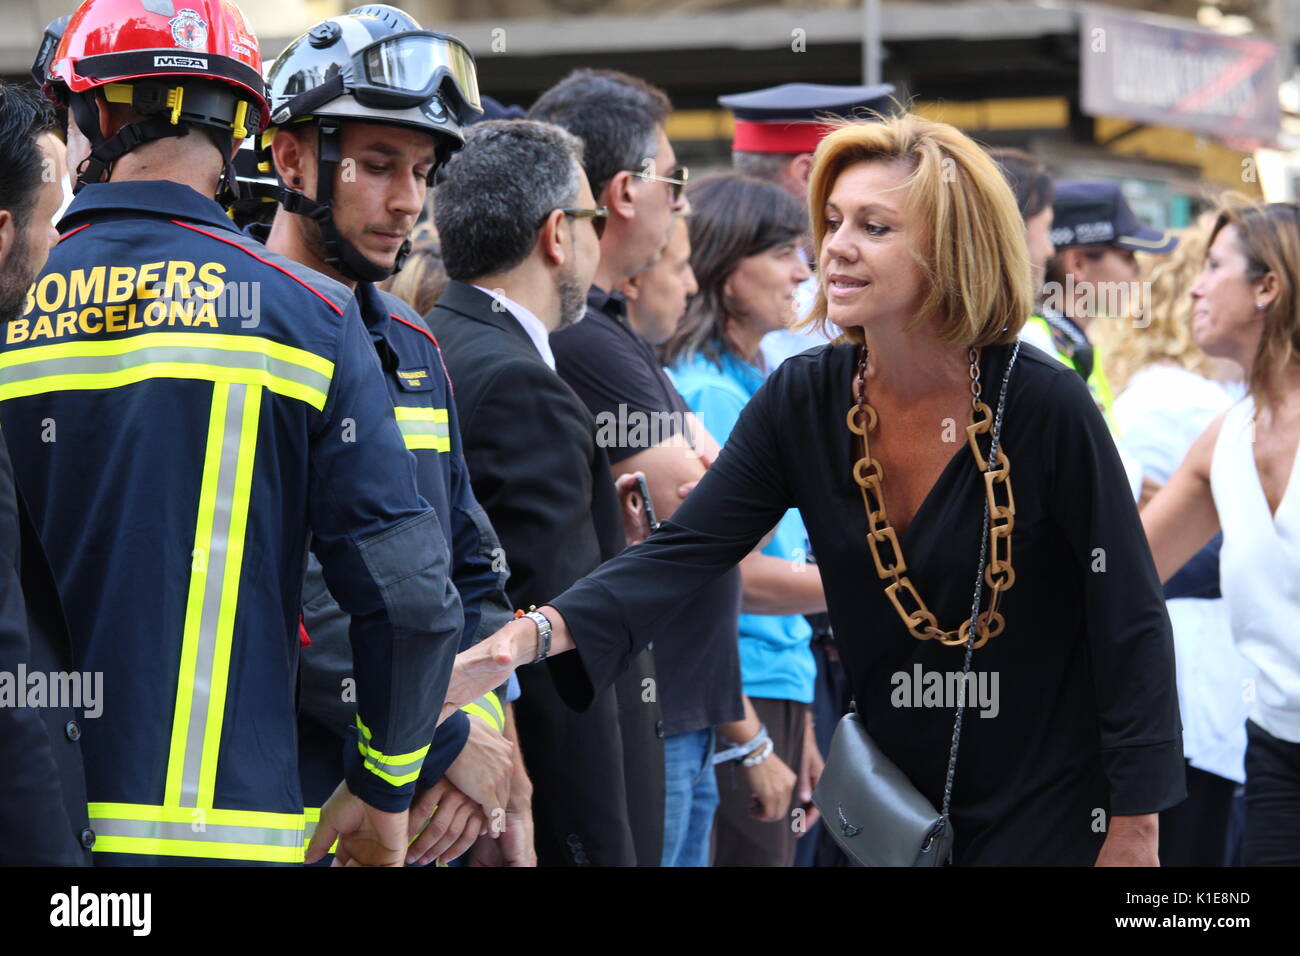 Barcelona, Spain. 26th August, 2017. Spanish ministry of defense Maria Dolores de Cospedal participating at the massive protest 'I am not scared' against terrorism and islamophobia after the attack on Rambla. The head of the manifestation was held by public service servants as firefighters, police, medical emergency services. Amongst the over 500.000 participants there was a huge representation of the spanish authorities and all political parties. Credit: Dino Geromella/Alamy Live News Credit: Dino Geromella/Alamy Live News Stock Photo